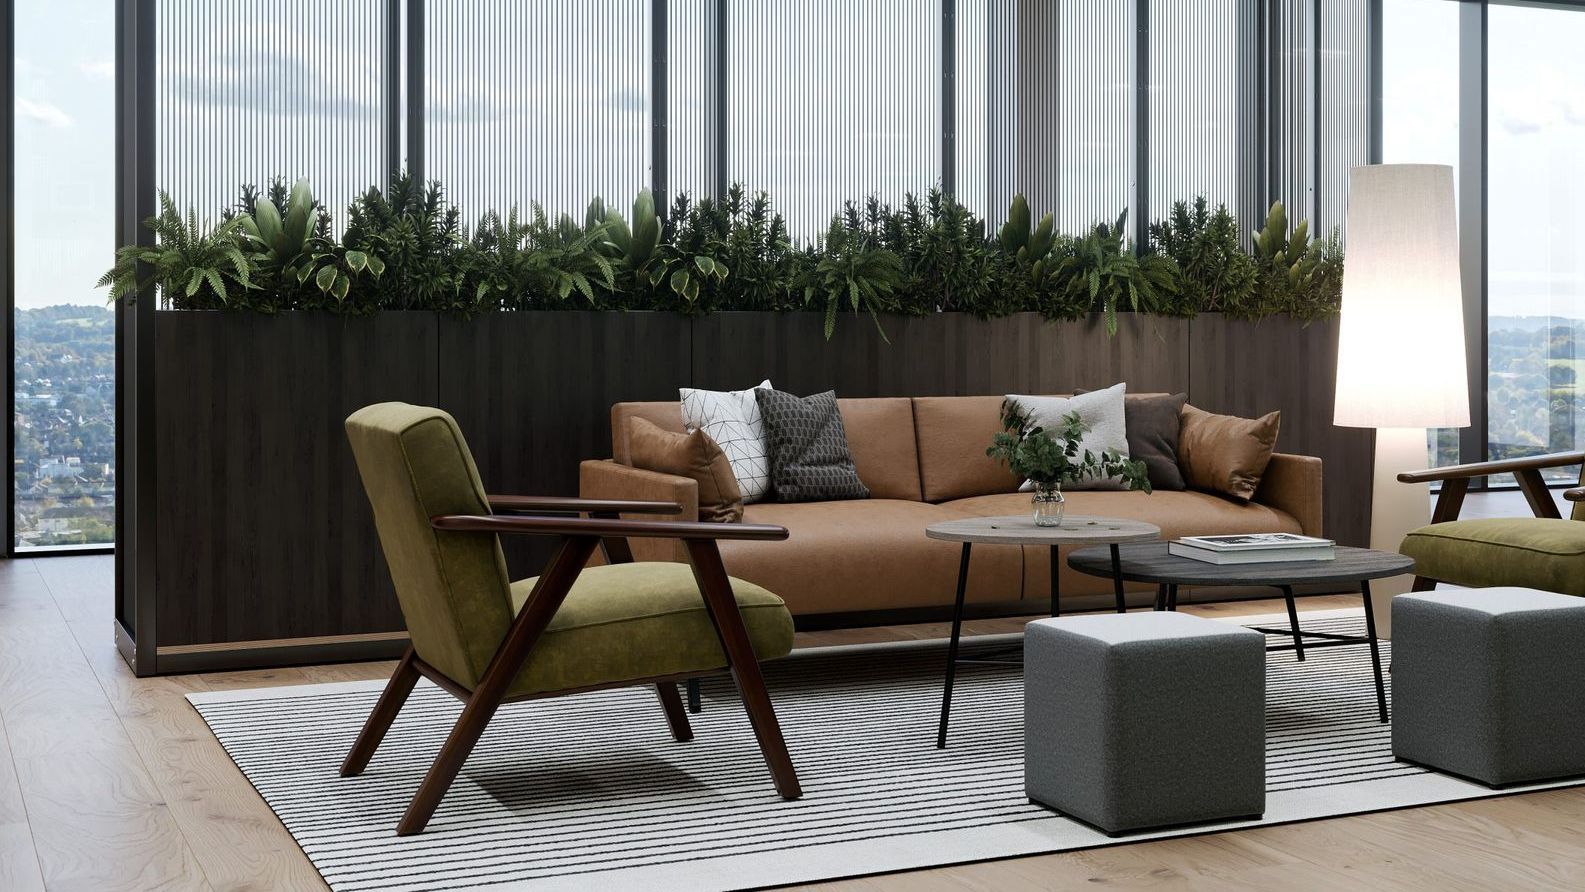 there is a brown sofa and a green armchair facing two coffee tables. the vibes of the office are organic and warm. behind the sofa is a divider with lush greenery. 